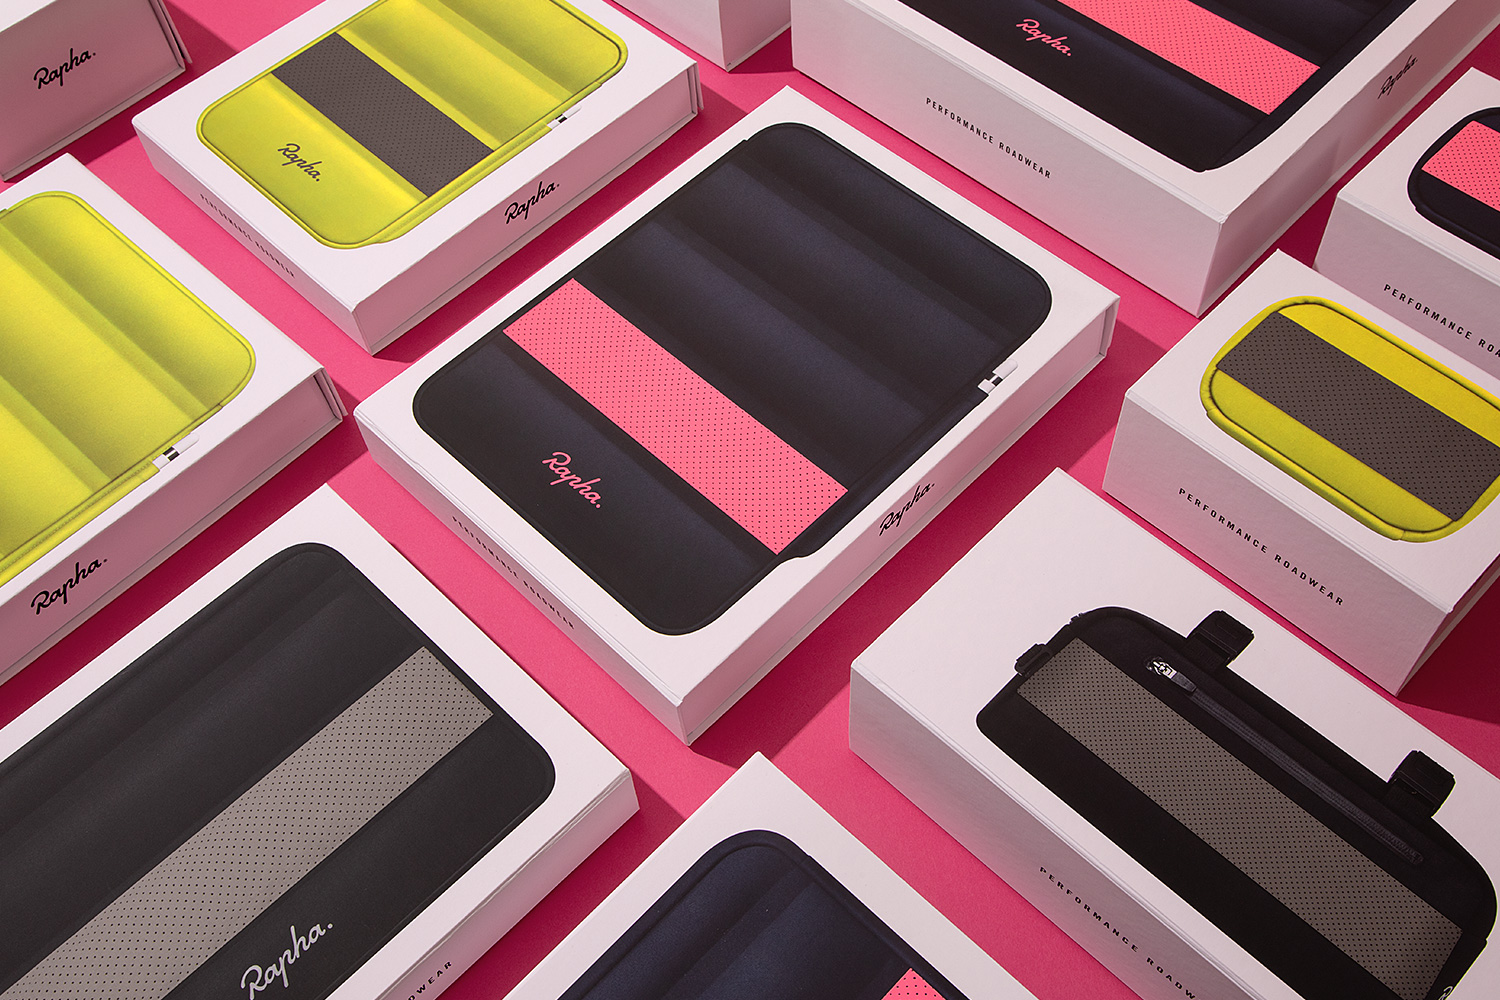 Progress Packaging Partners Rapha Apple Cycling Apparel Luxury Technology Ipone Ipad Laptop Luggage Mobile Phone Cell Store Bespoke Collapsible Retail 6